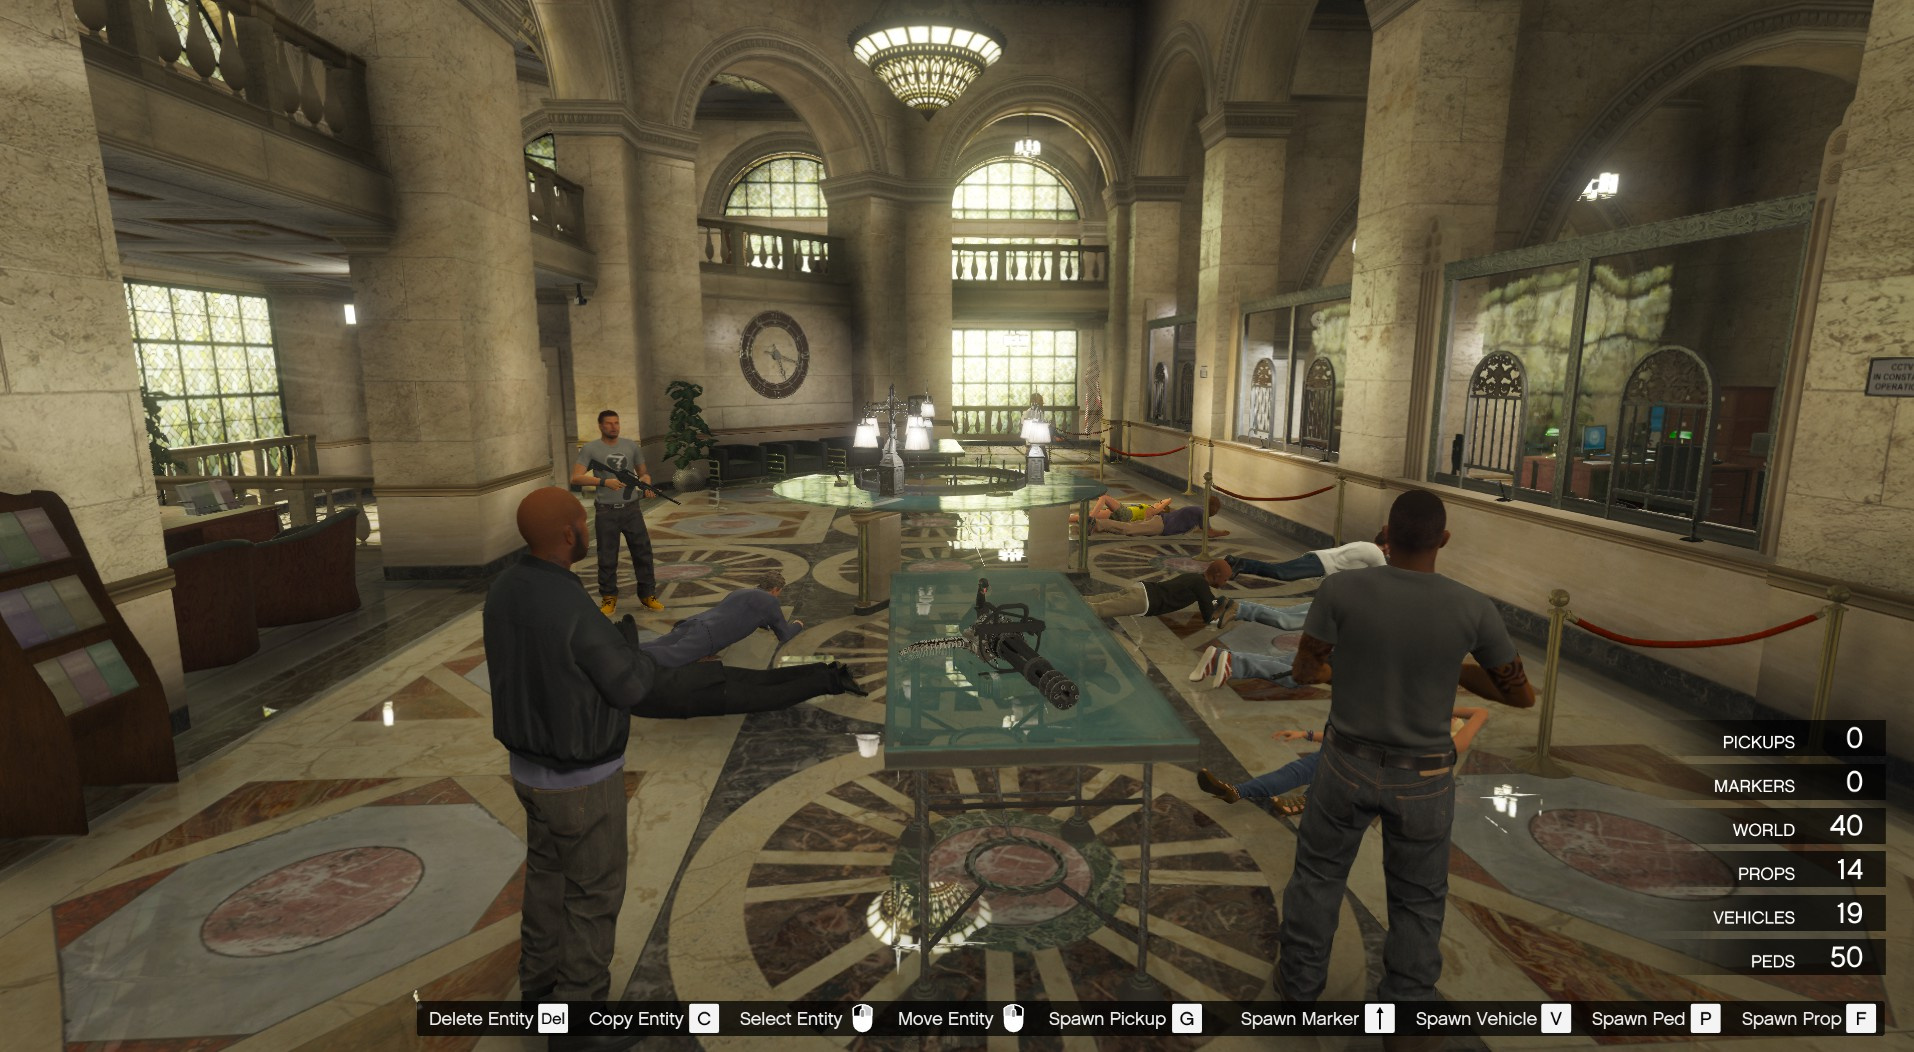 All banks in gta 5 фото 65